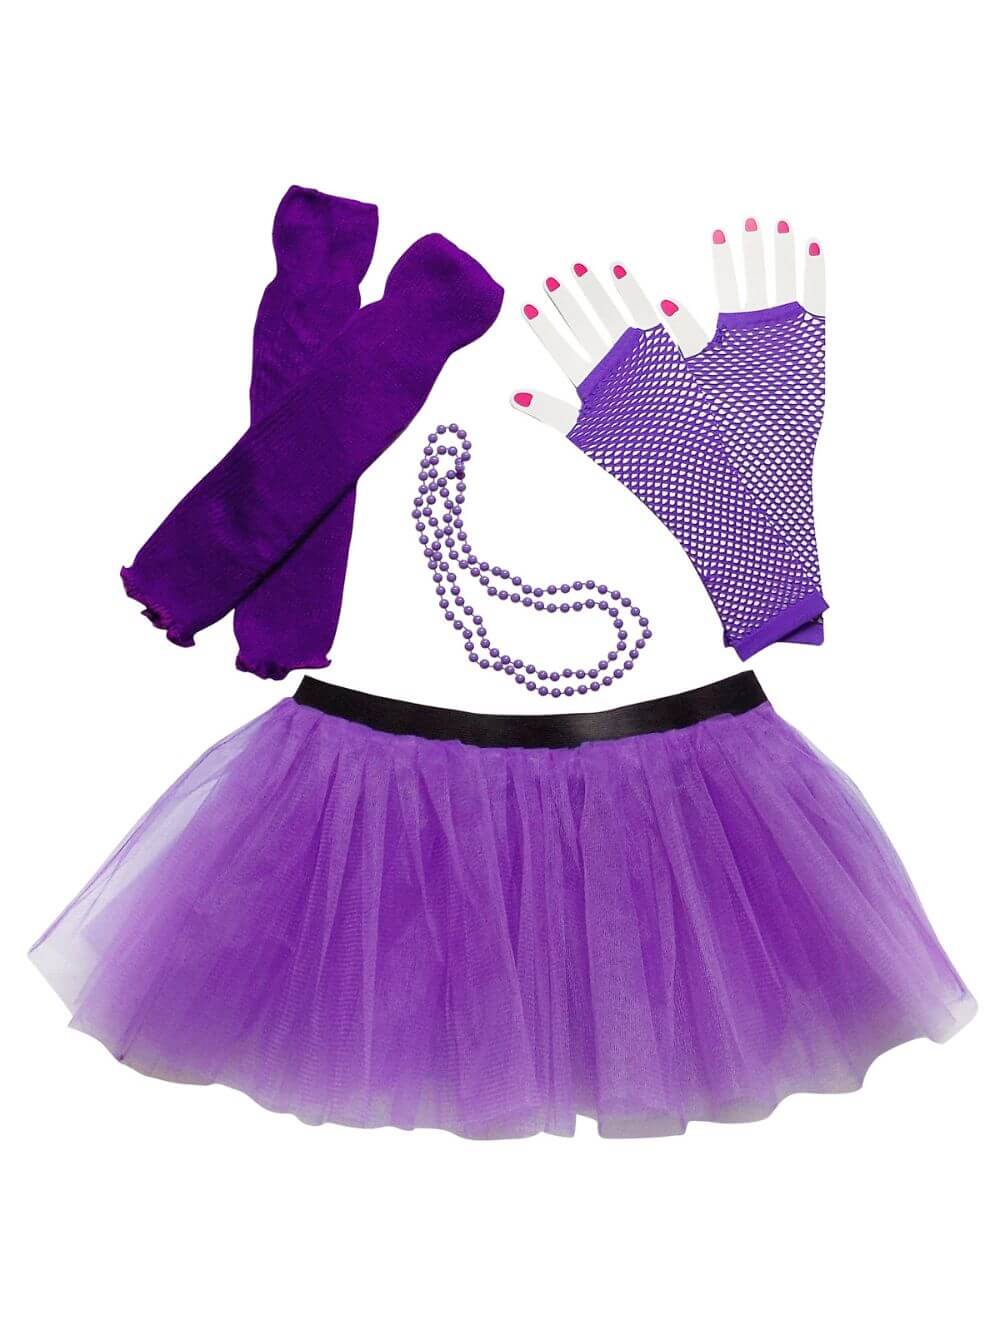 80s Costume for Teens or Women in Neon Purple with Tutu & Accessories - Sydney So Sweet